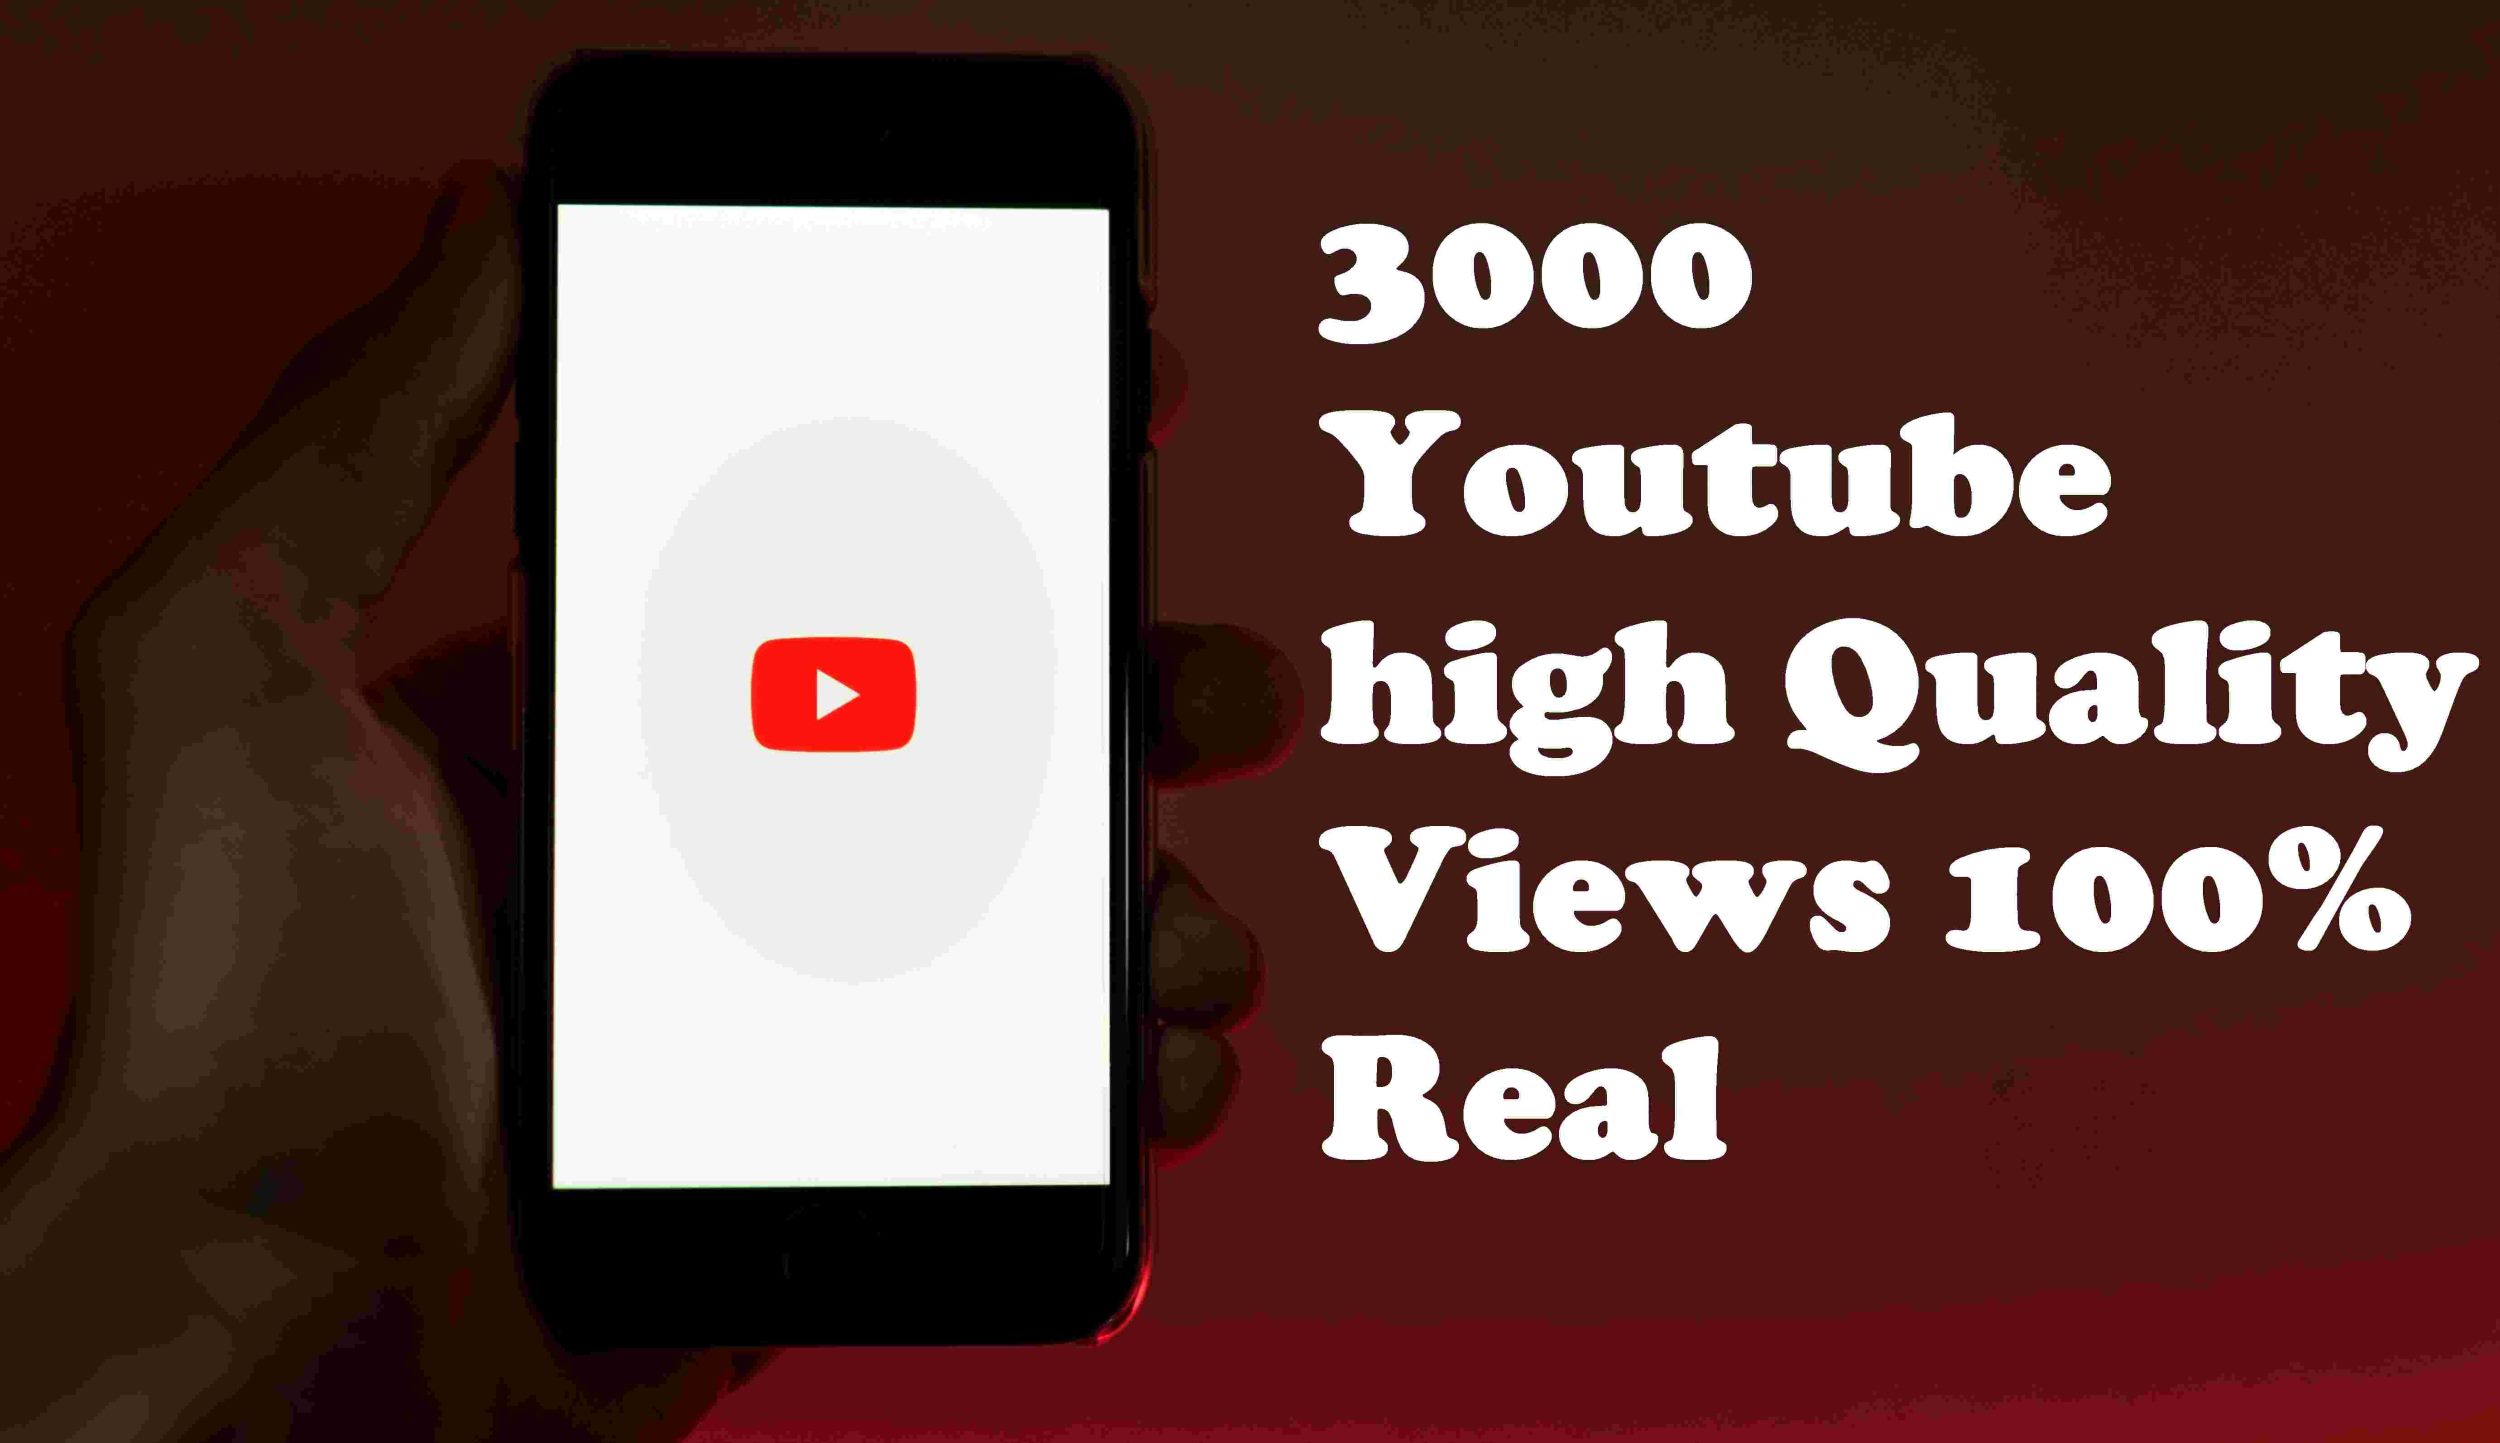 3000 YouTube Views with best quality and 100% real